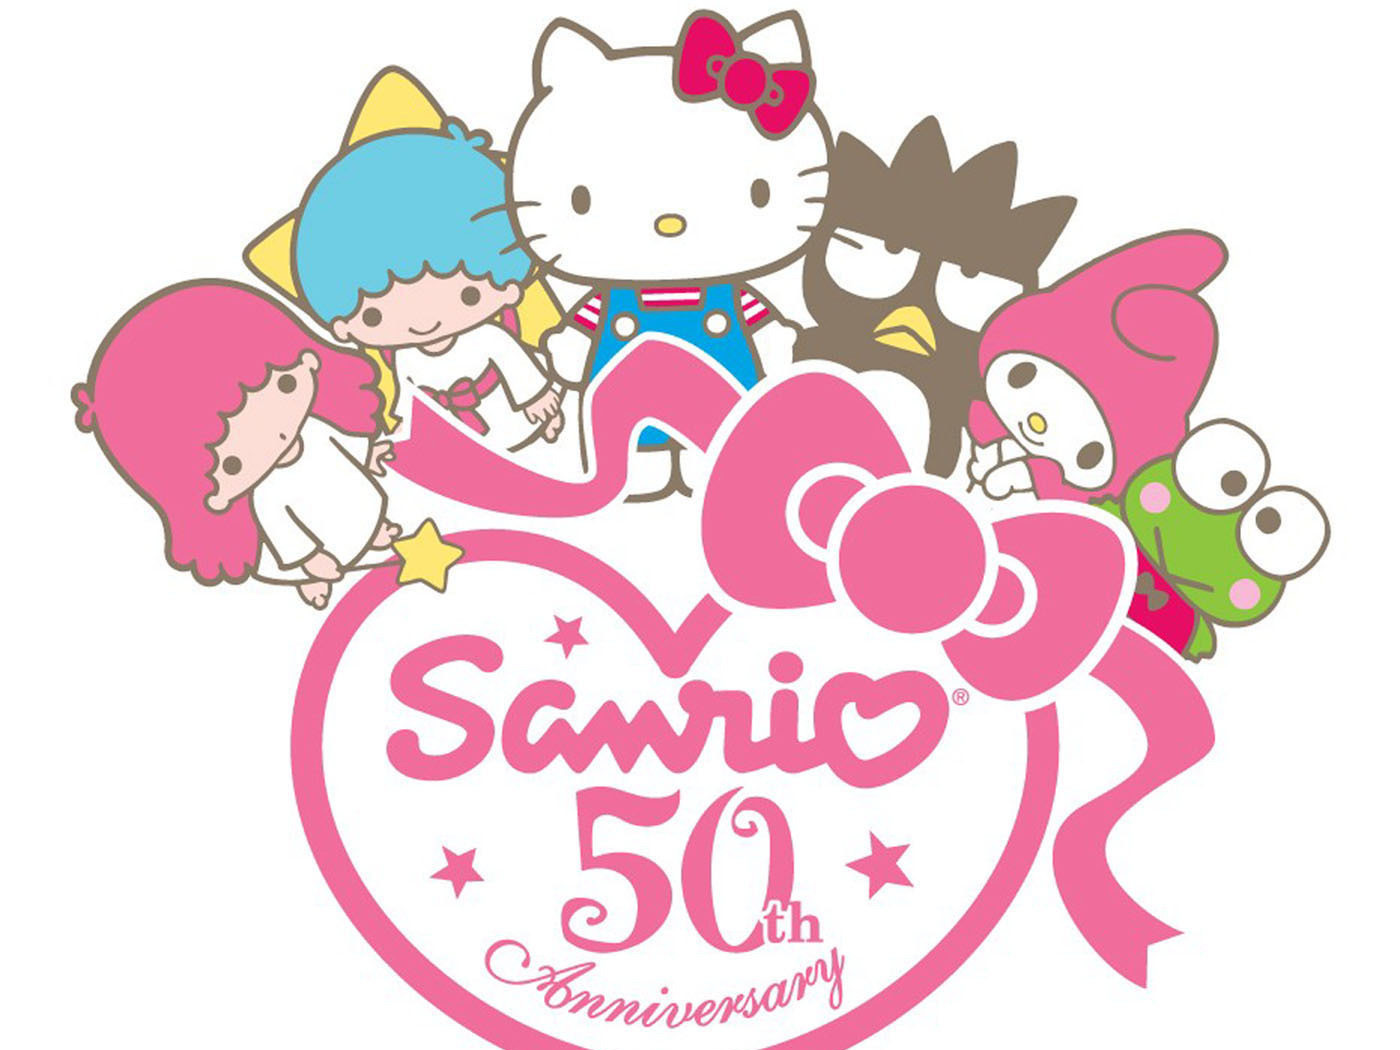 The Japanese company Sanrio must pay 6.2 million euros to the European Commission